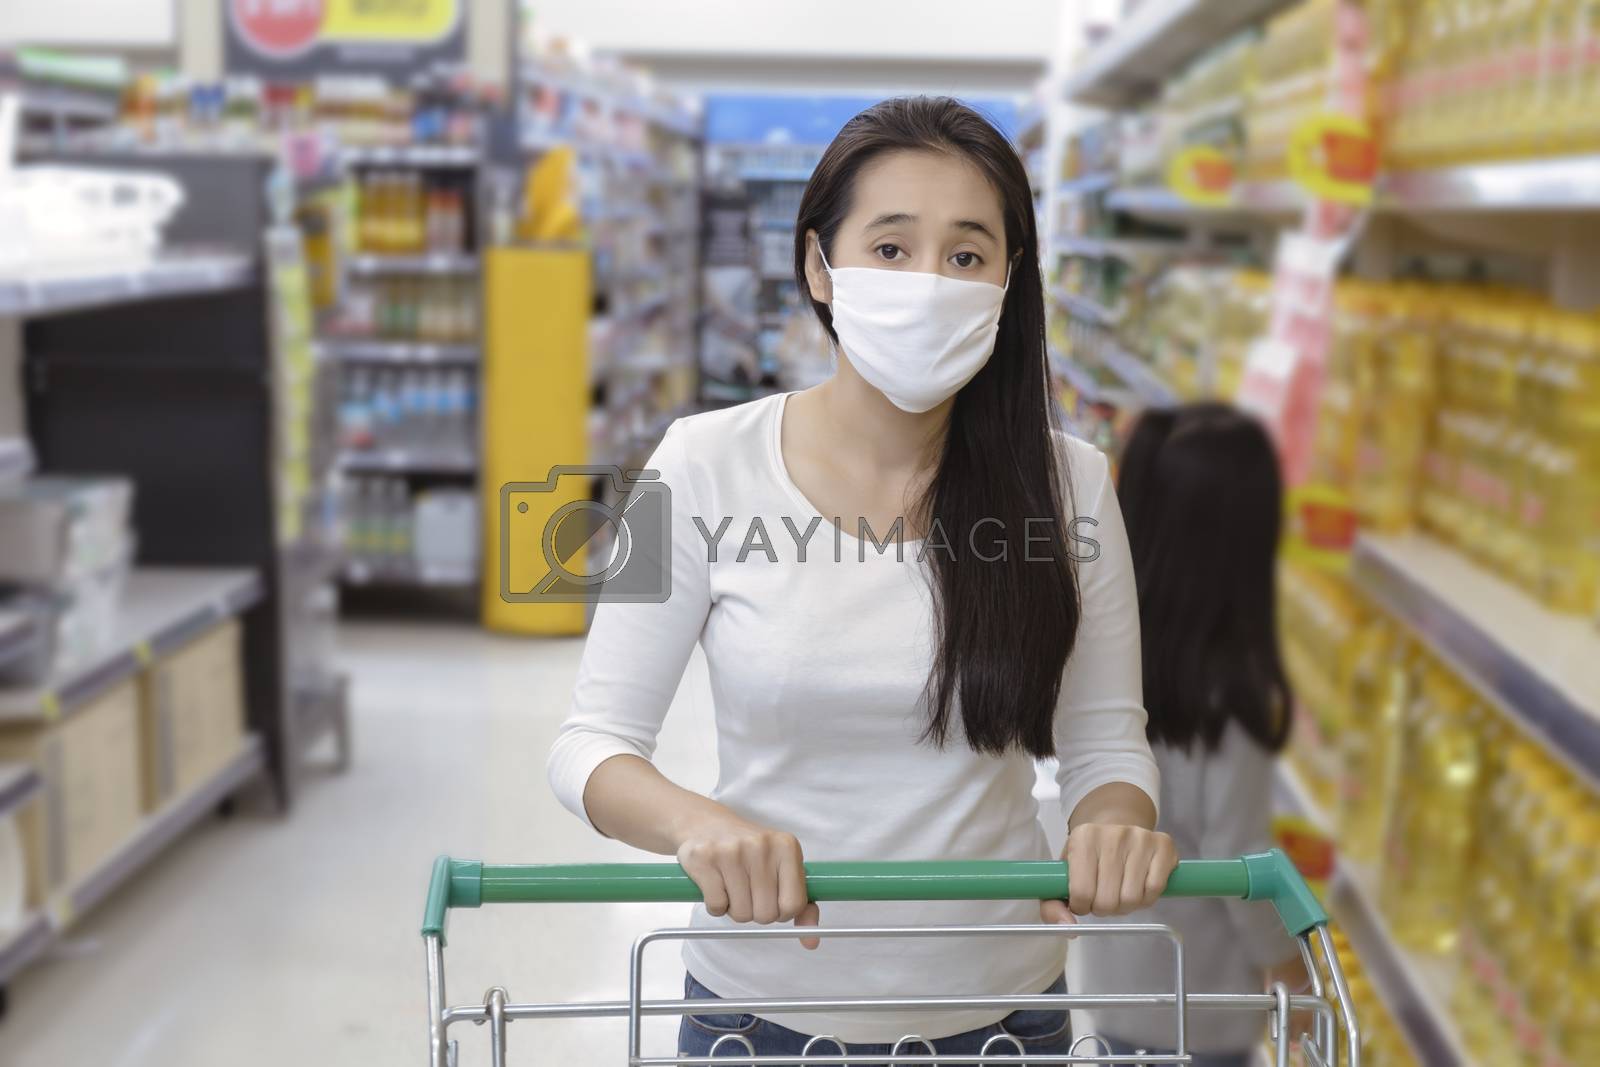 Royalty free image of Asian woman wear face mask push shopping cart in suppermarket de by Satrinekarn